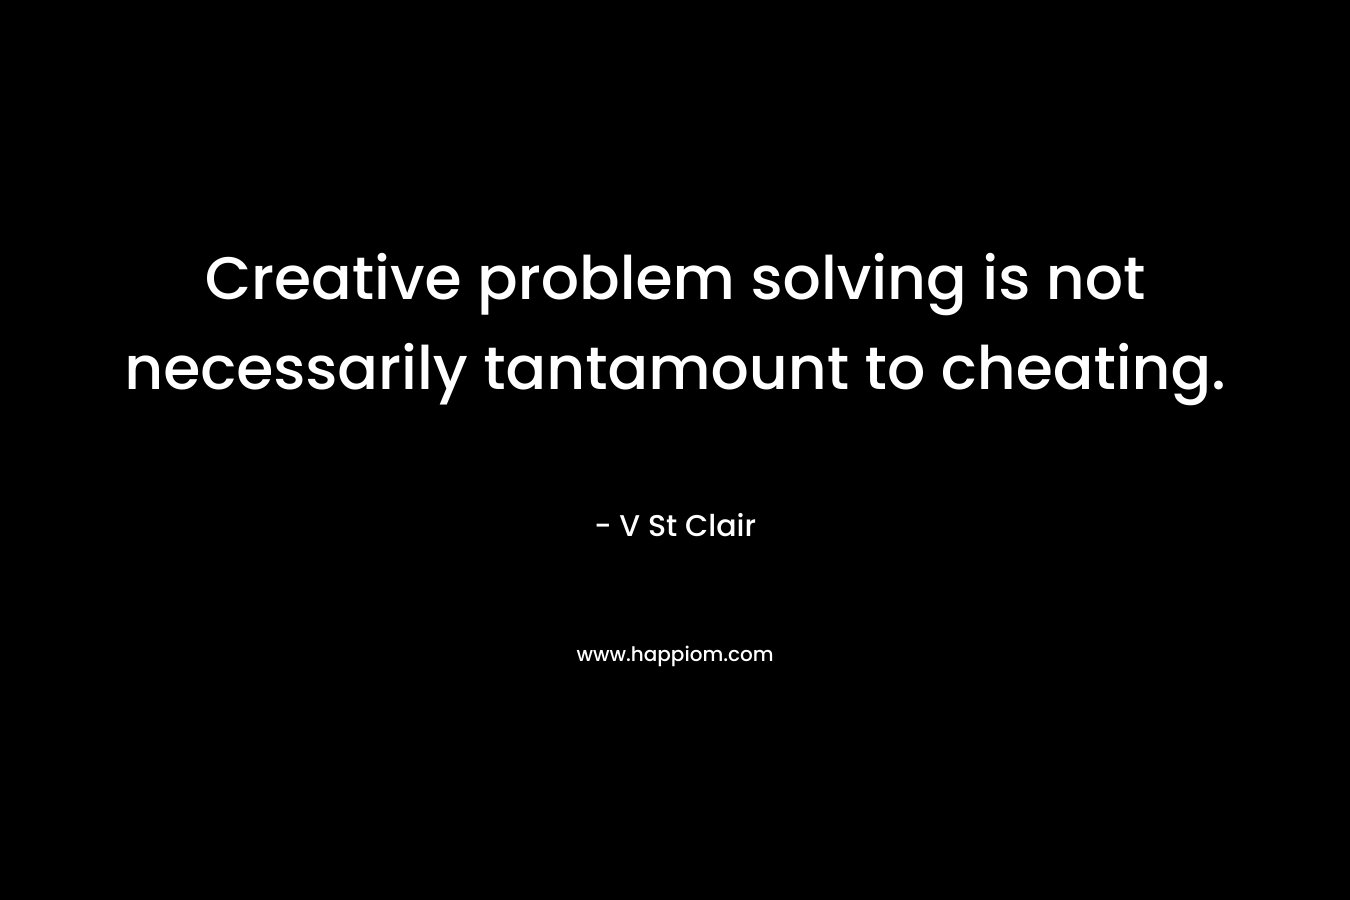 Creative problem solving is not necessarily tantamount to cheating. – V St Clair